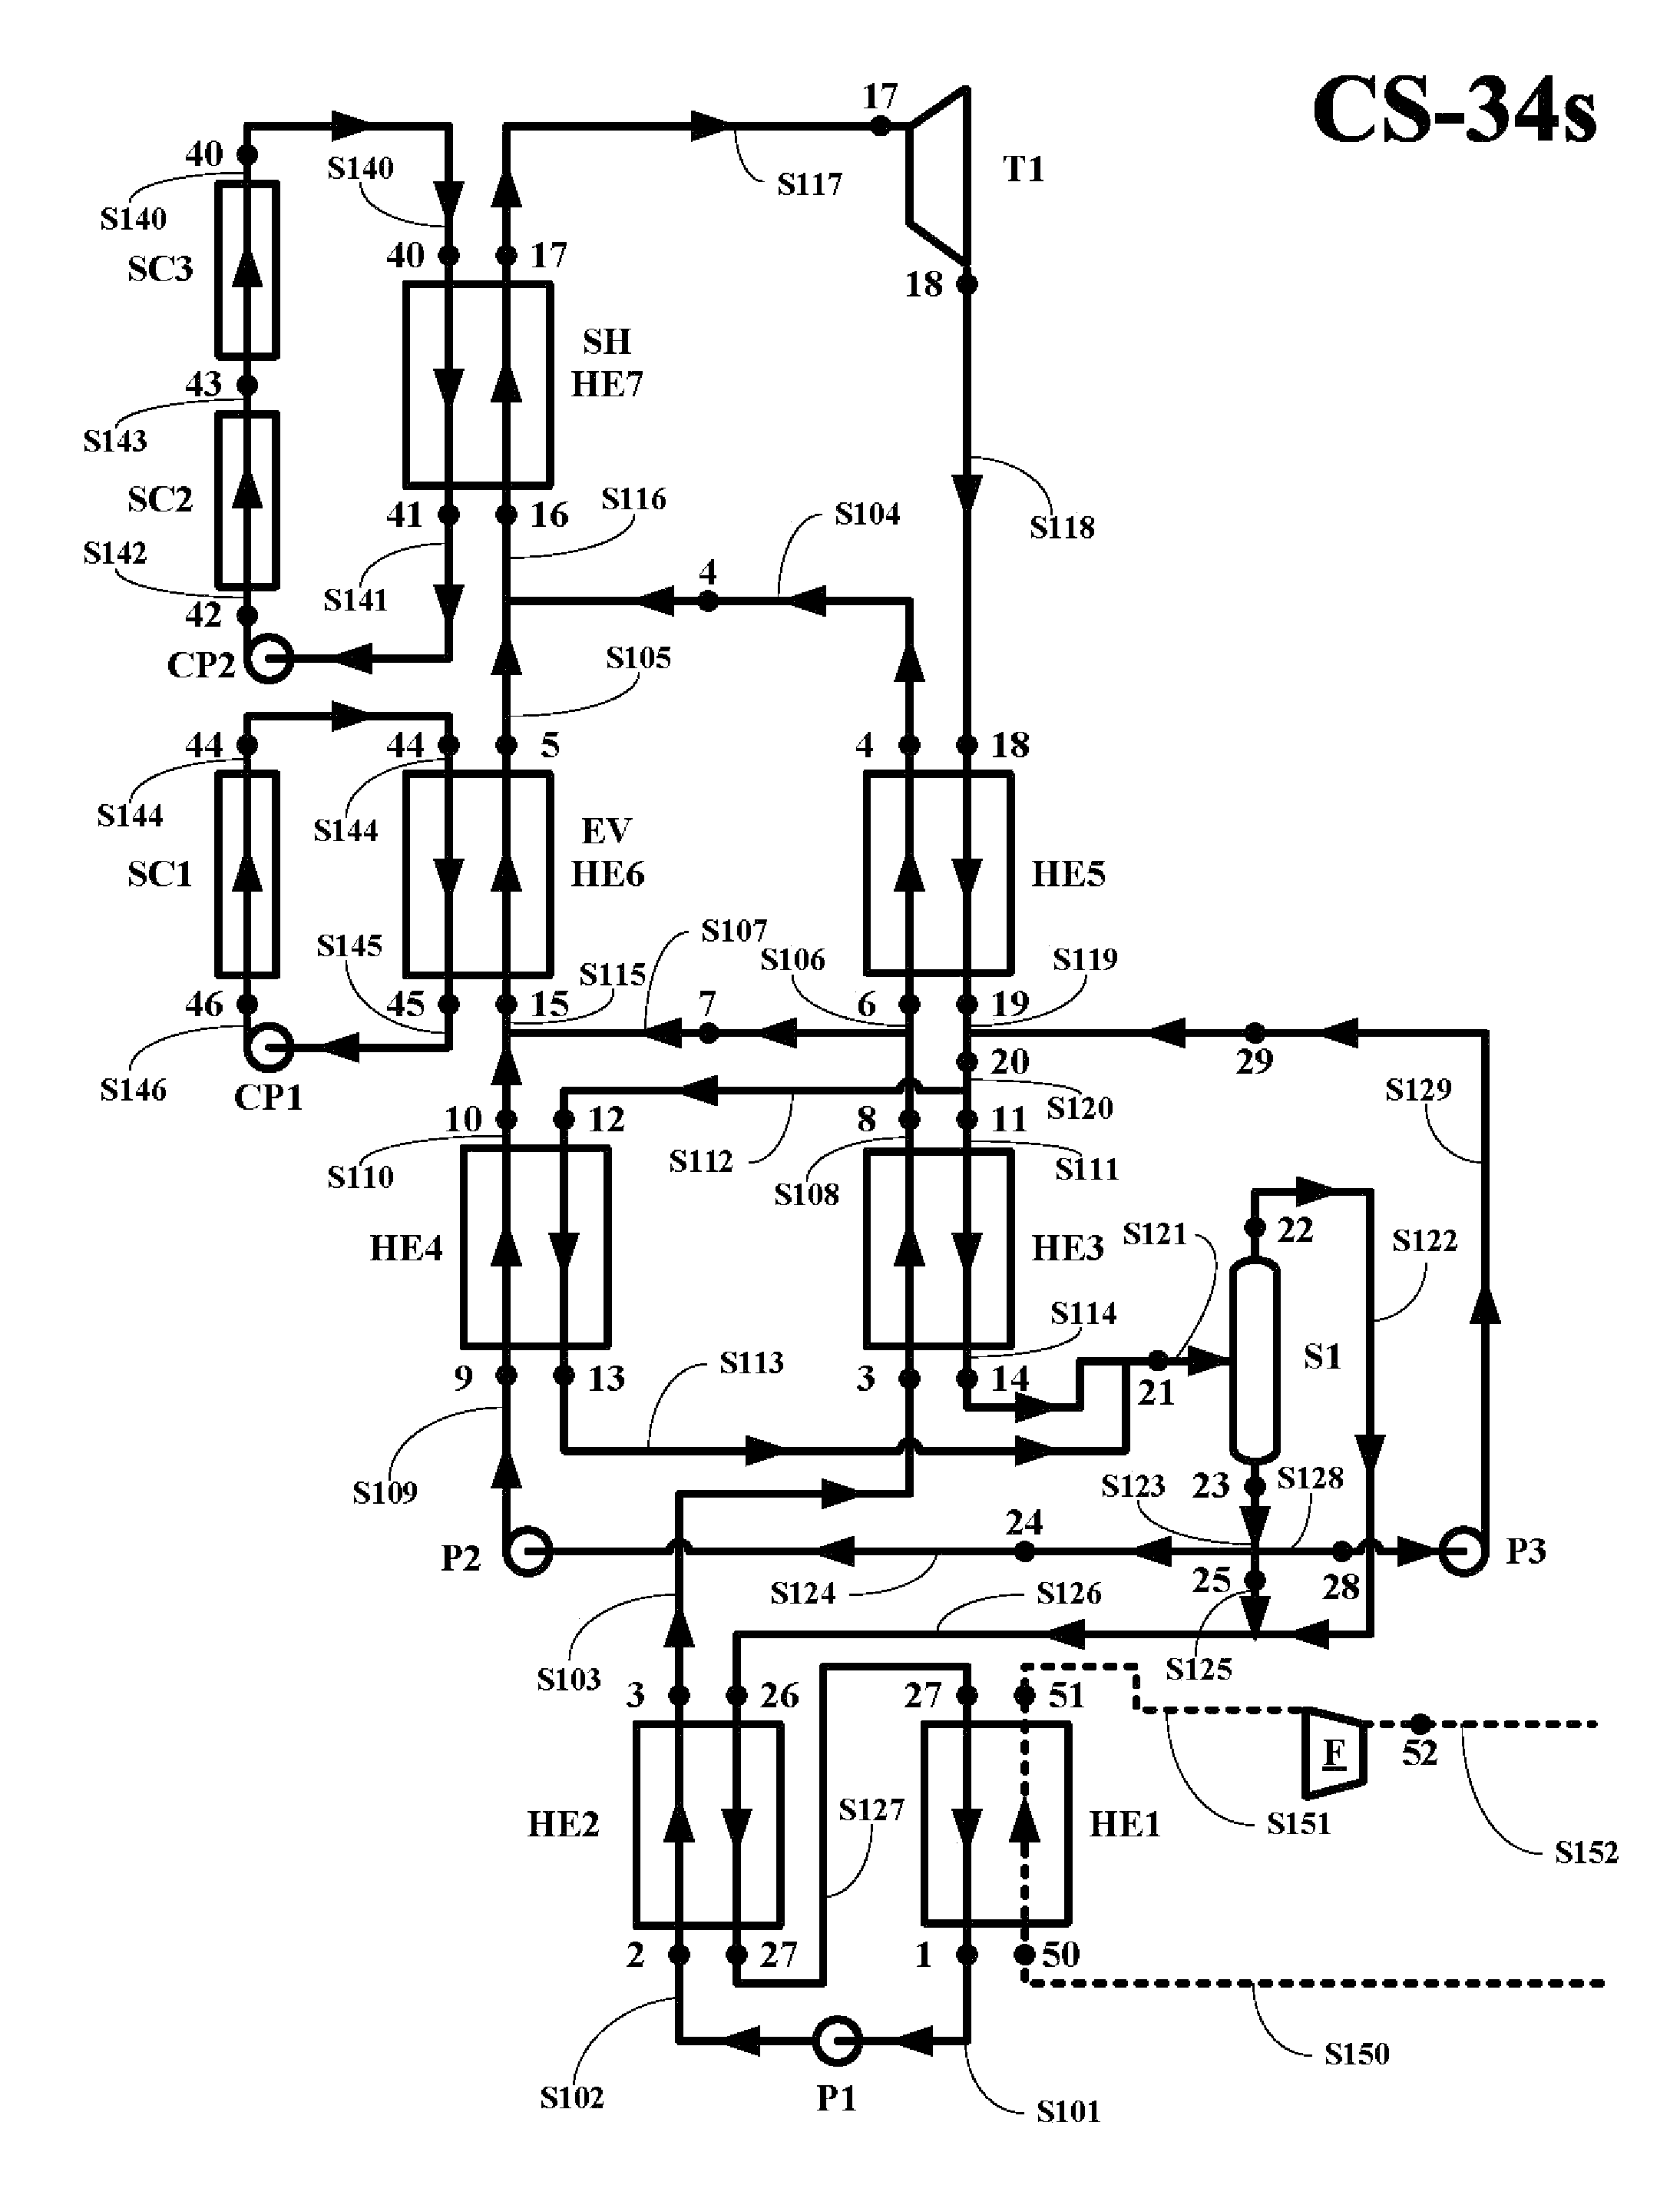 Power systems designed for the utilization of heat generated by solar-thermal collectors and methods for making and using same